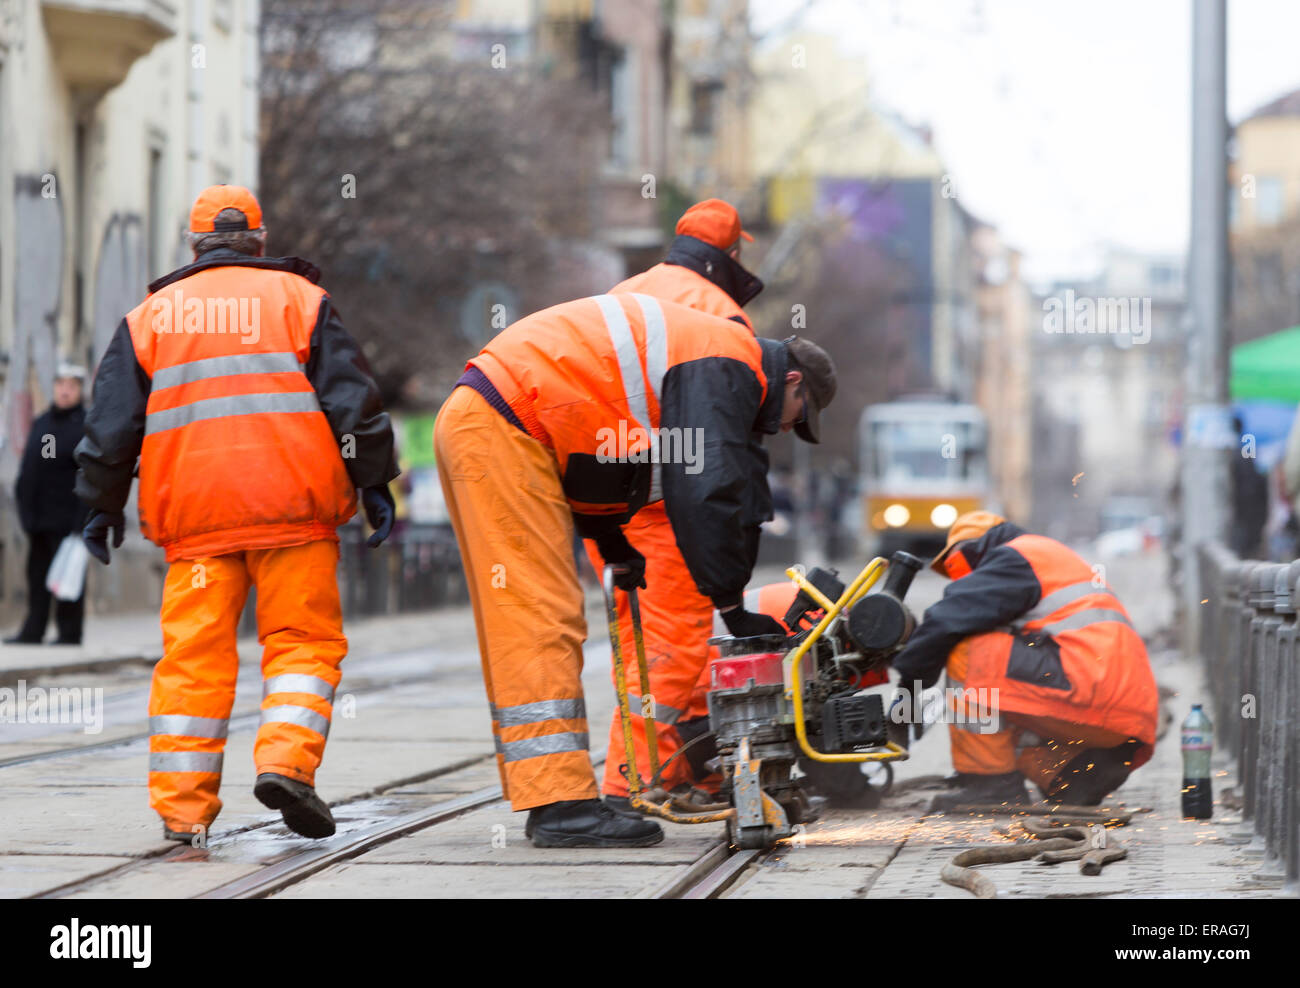 Sofia, Bulgaria - April 7, 2015: Tram road workers are repairing the tram tracks on the tram road. Stock Photo